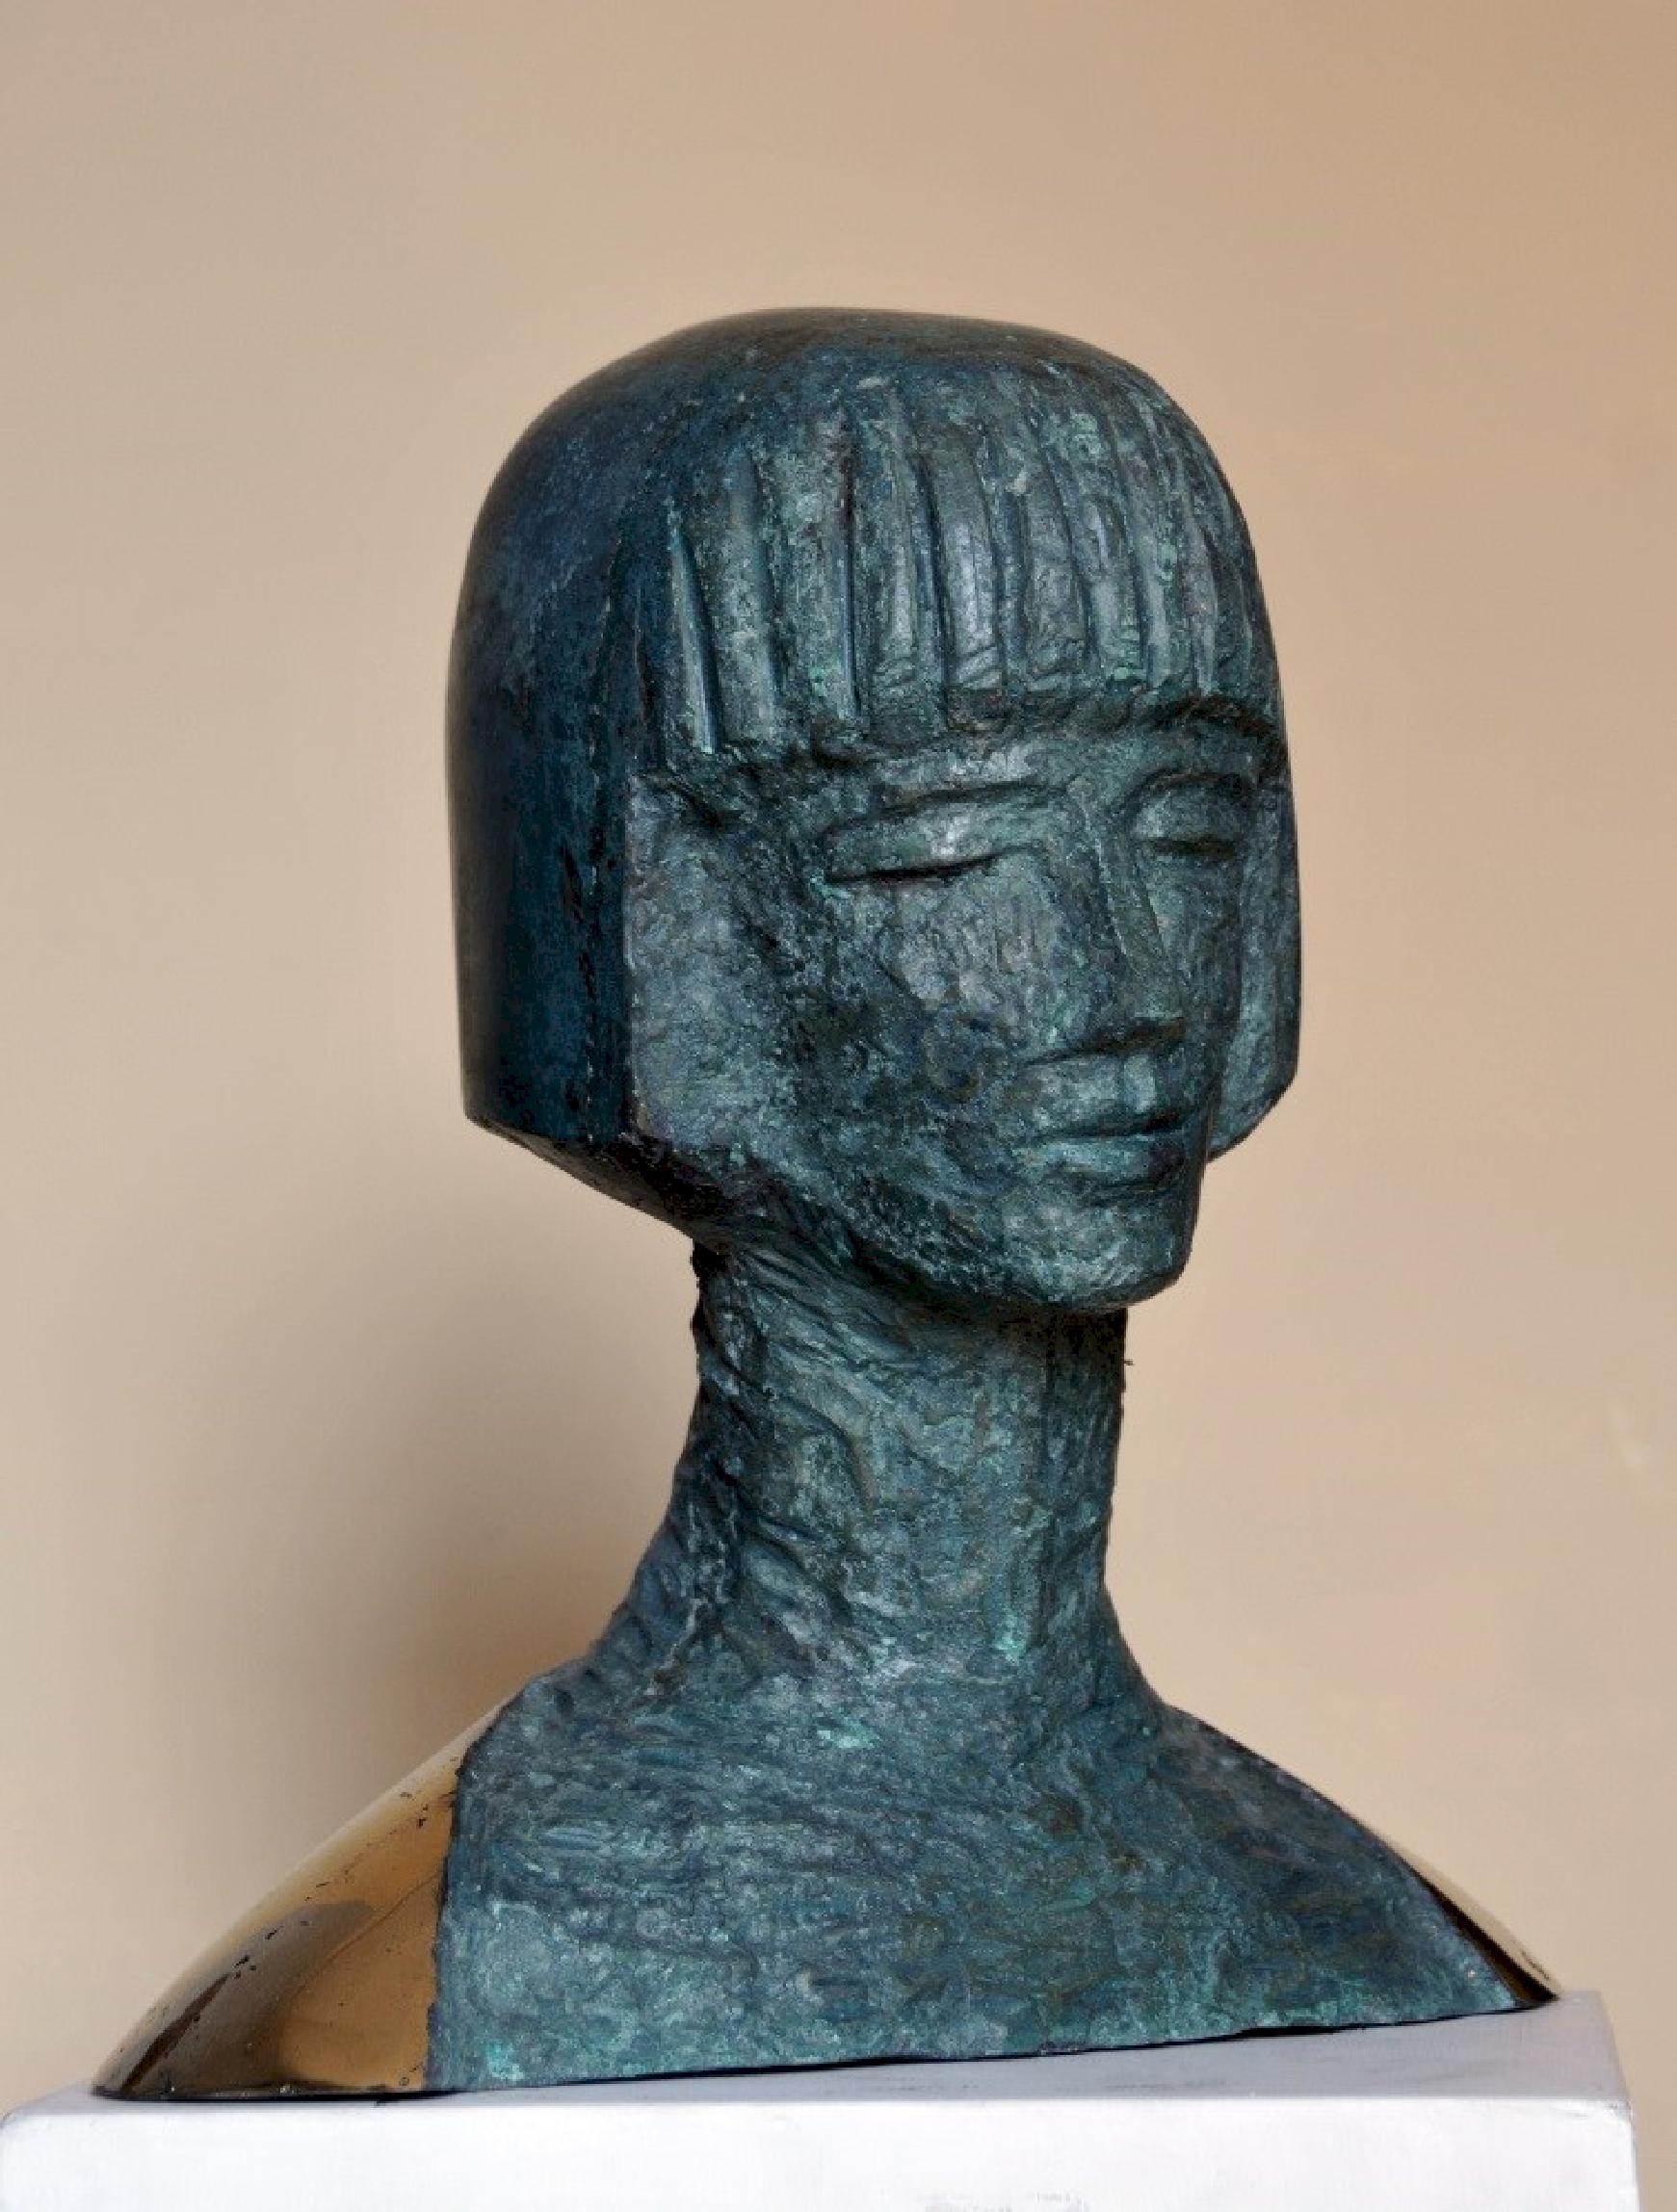 "Patty" Bronze Sculpture 17" x 17" x 9" inch by Sarkis Tossonian